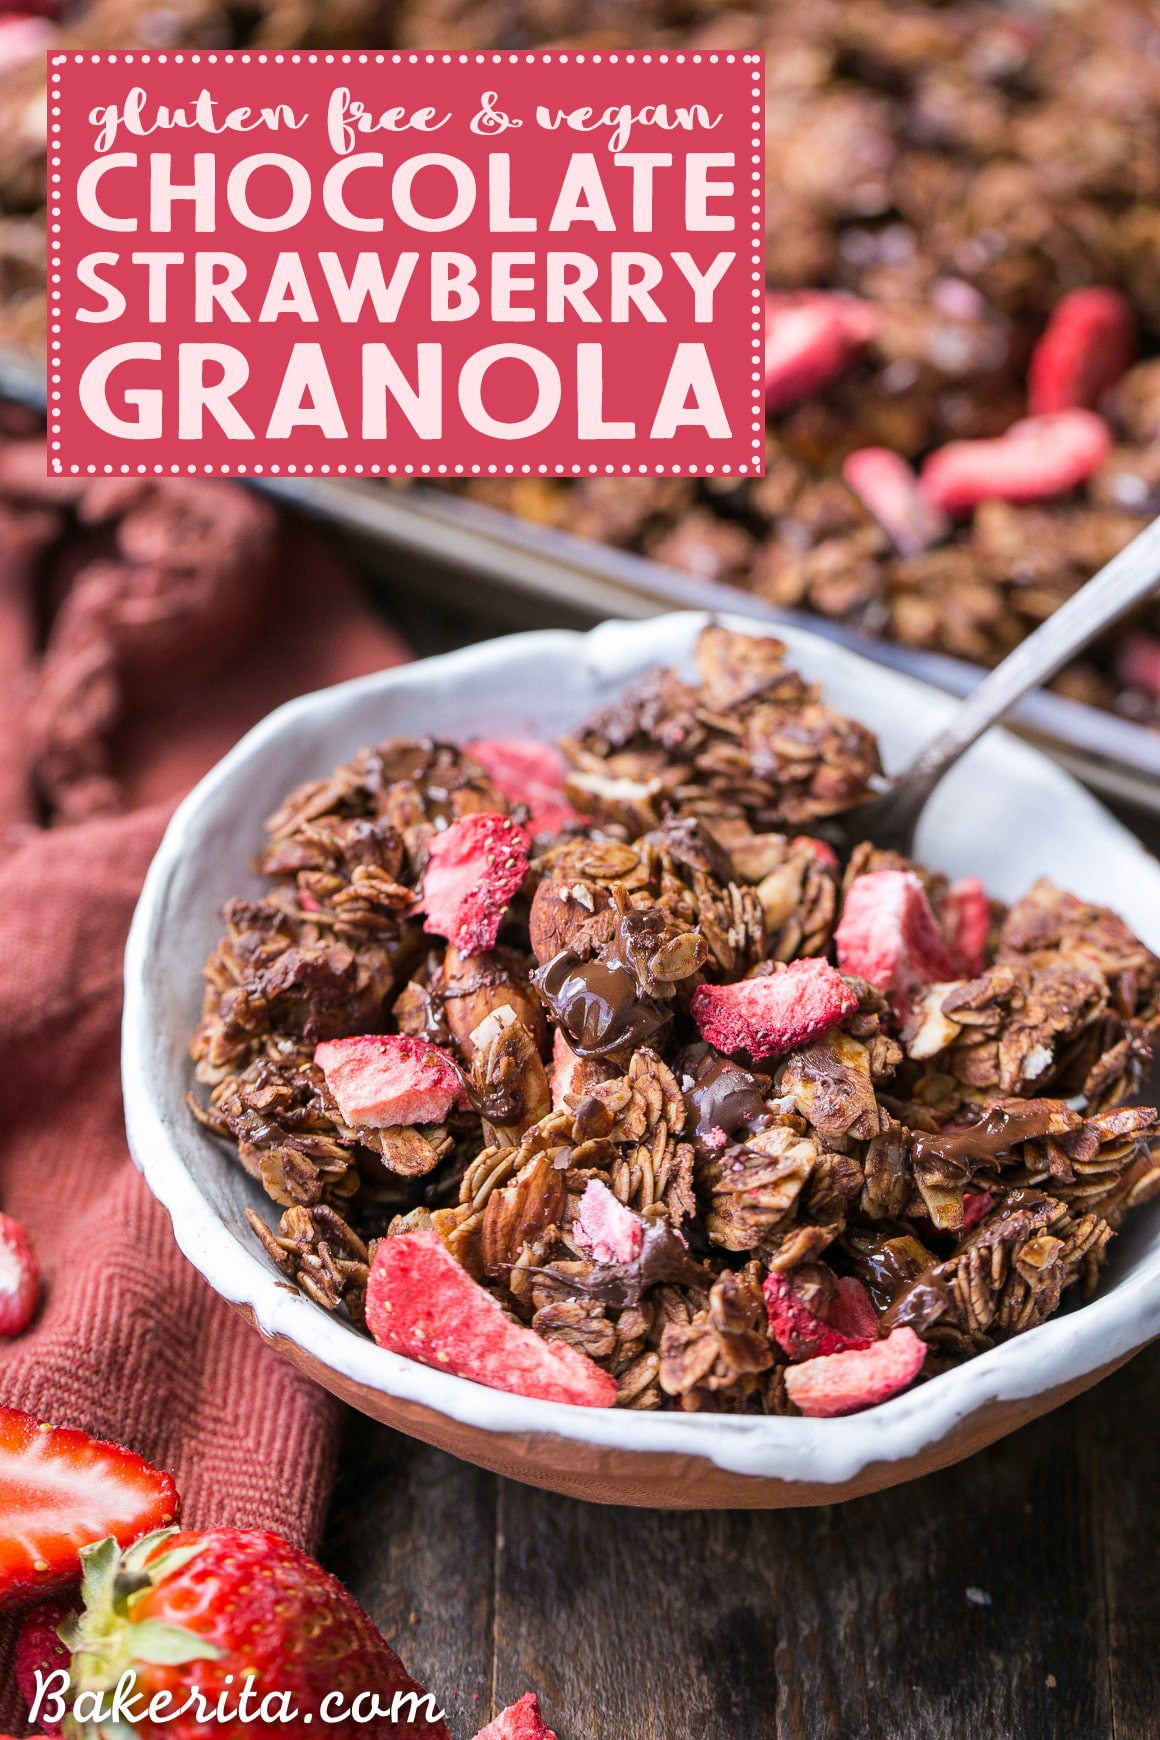 Chocolate Strawberry Granola is healthy enough to eat for breakfast, but it's so delicious you'll want to have it for dessert too! This simple and easy granola recipe is gluten-free, vegan, and refined sugar free, and it's loaded with chocolate & strawberry flavor.